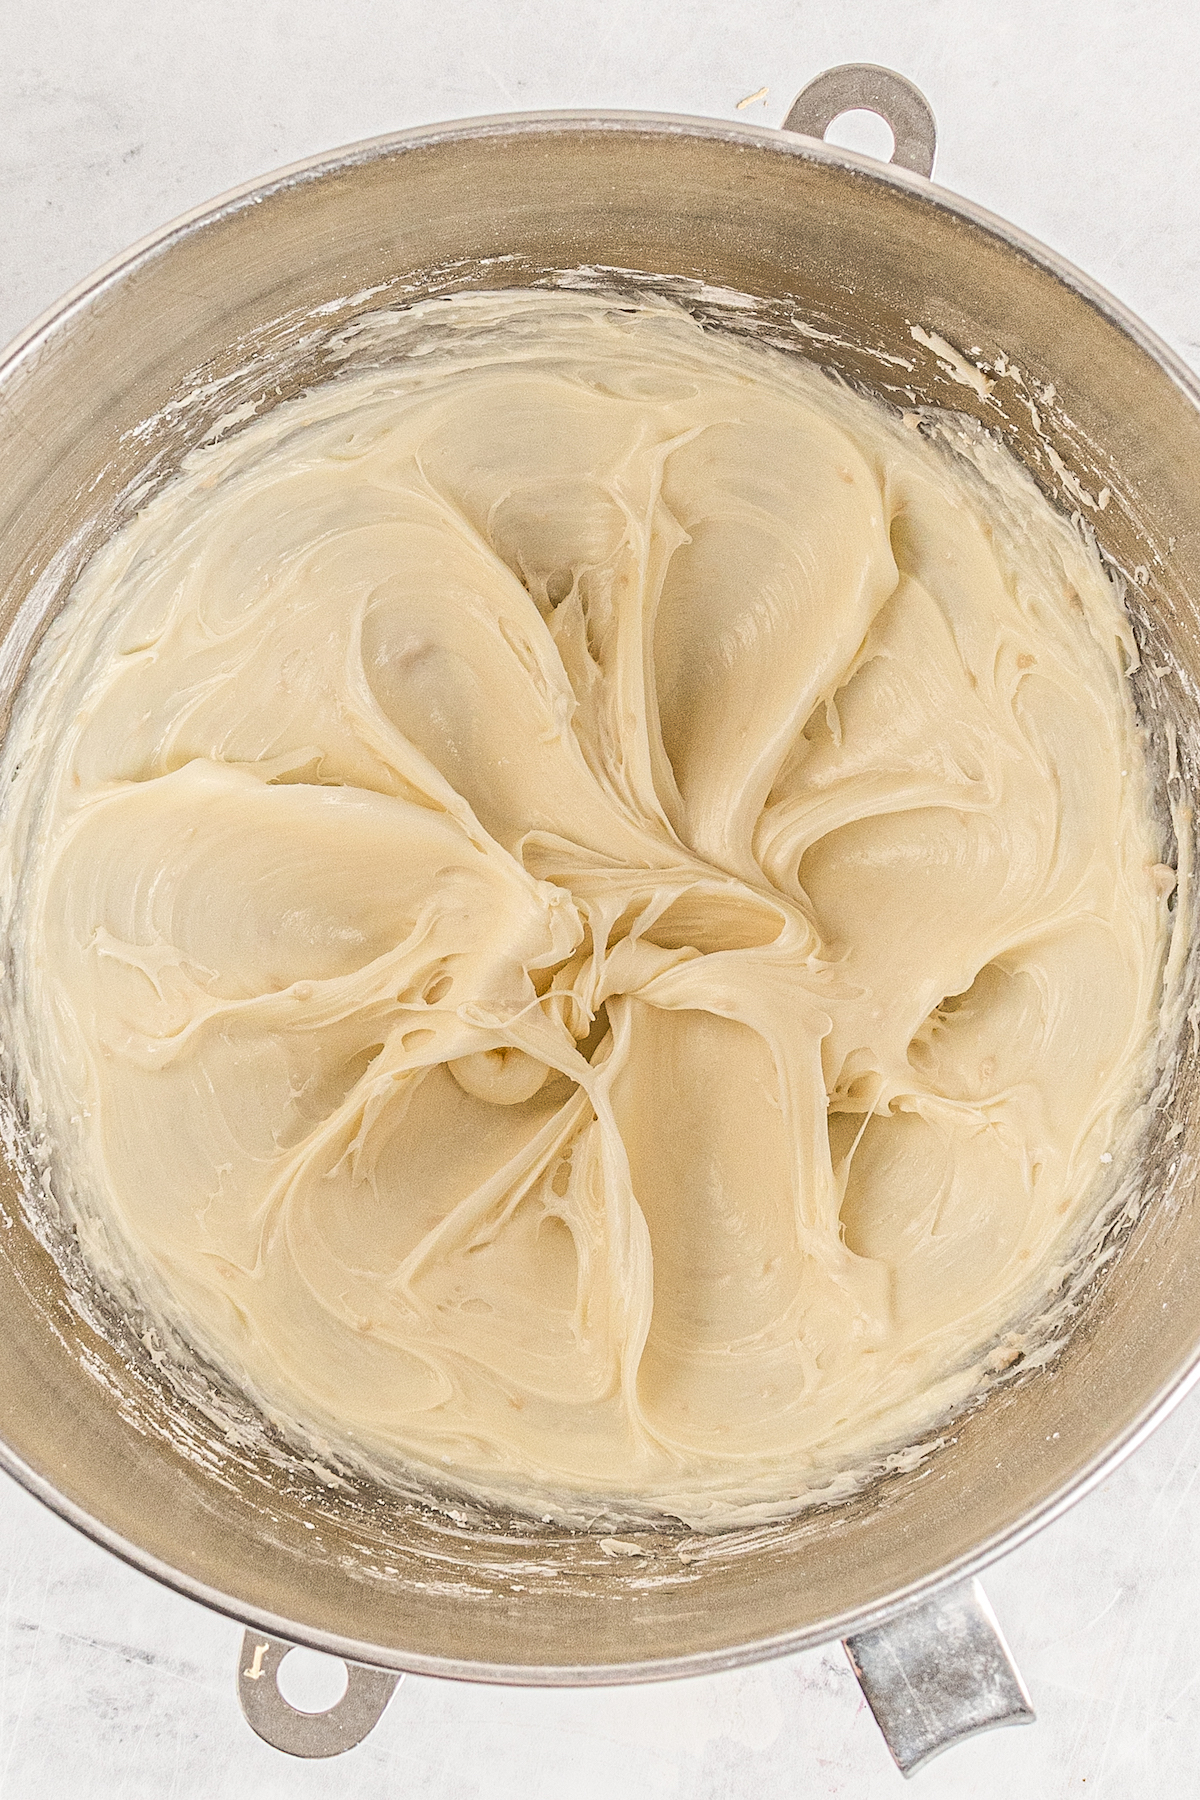 Cream cheese that's been whipped in a mixing bowl